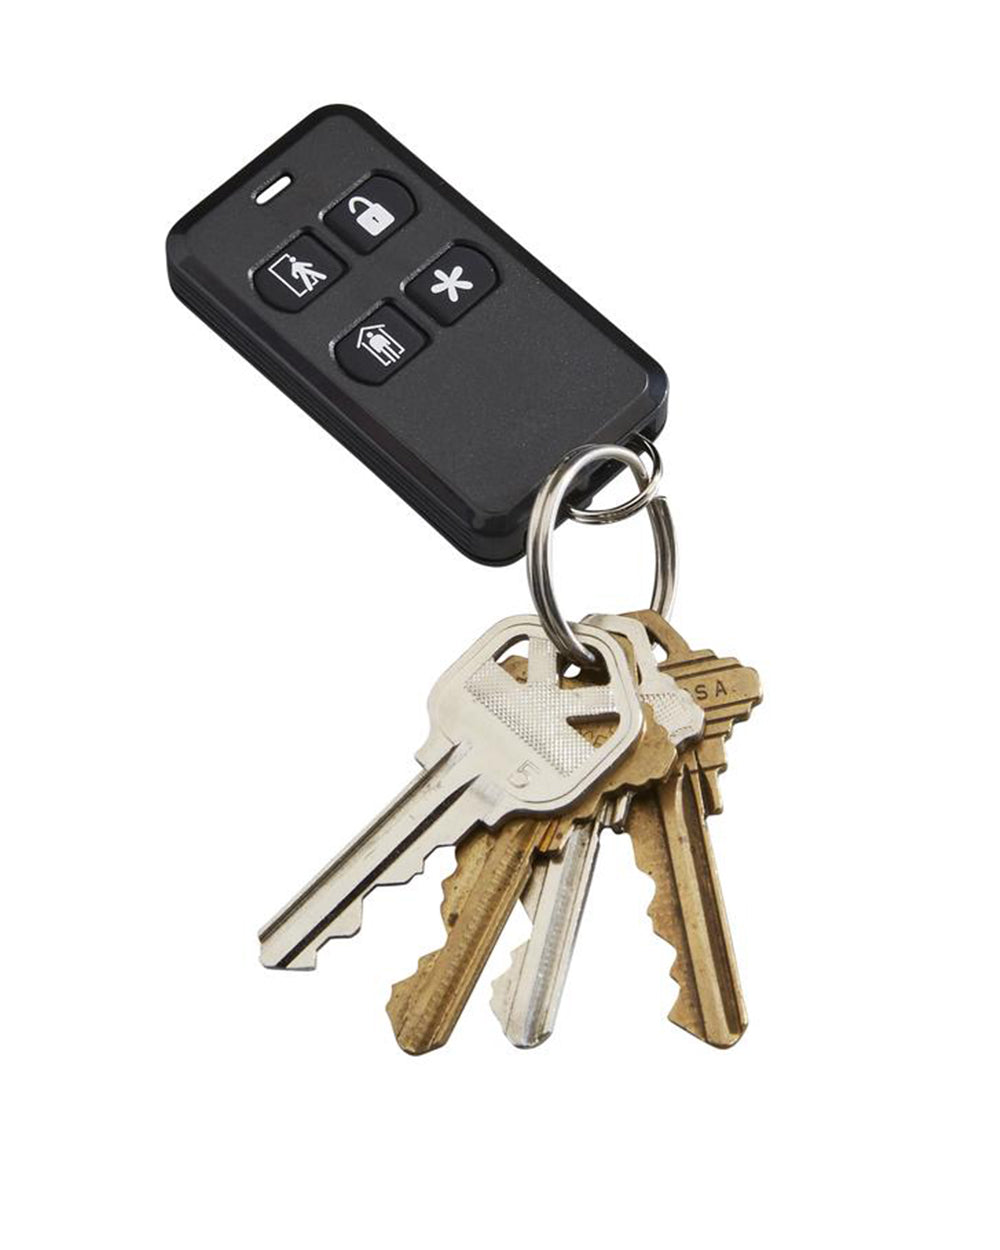 4-Button Key Fob Remote for Home Security System - Constellation Connect